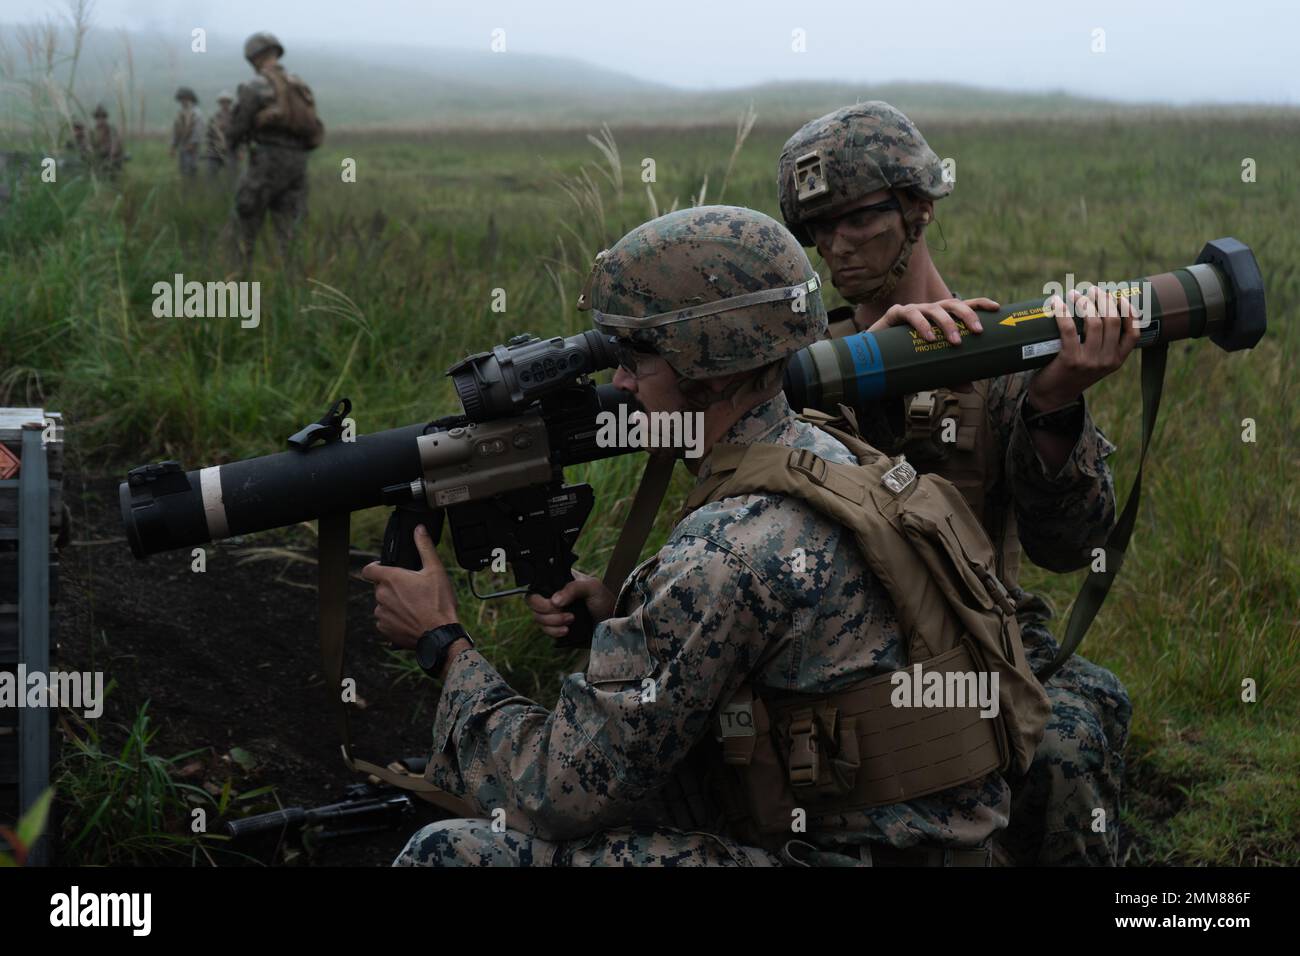 U.S. Marine Corps Cpl. Jacob Michaltz (left) and Lance Cpl. Atticus Pond (right), both riflemen with 3d Battalion, 3d Marines, load a Mk 153 shoulder-launched multipurpose assault weapon during Fuji Viper 22.5 at Combined Arms Training Center, Camp Fuji, Japan, Sept. 15, 2022. Exercise Fuji Viper exemplifies a commitment to realistic training that produces lethal, ready, and adaptable forces capable of decentralized operations across a wide range of missions. 3/3 is forward deployed in the Indo-Pacific under 4th Marines, 3d Marine Division as part of the Unit Deployment Program. Michaltz is a Stock Photo